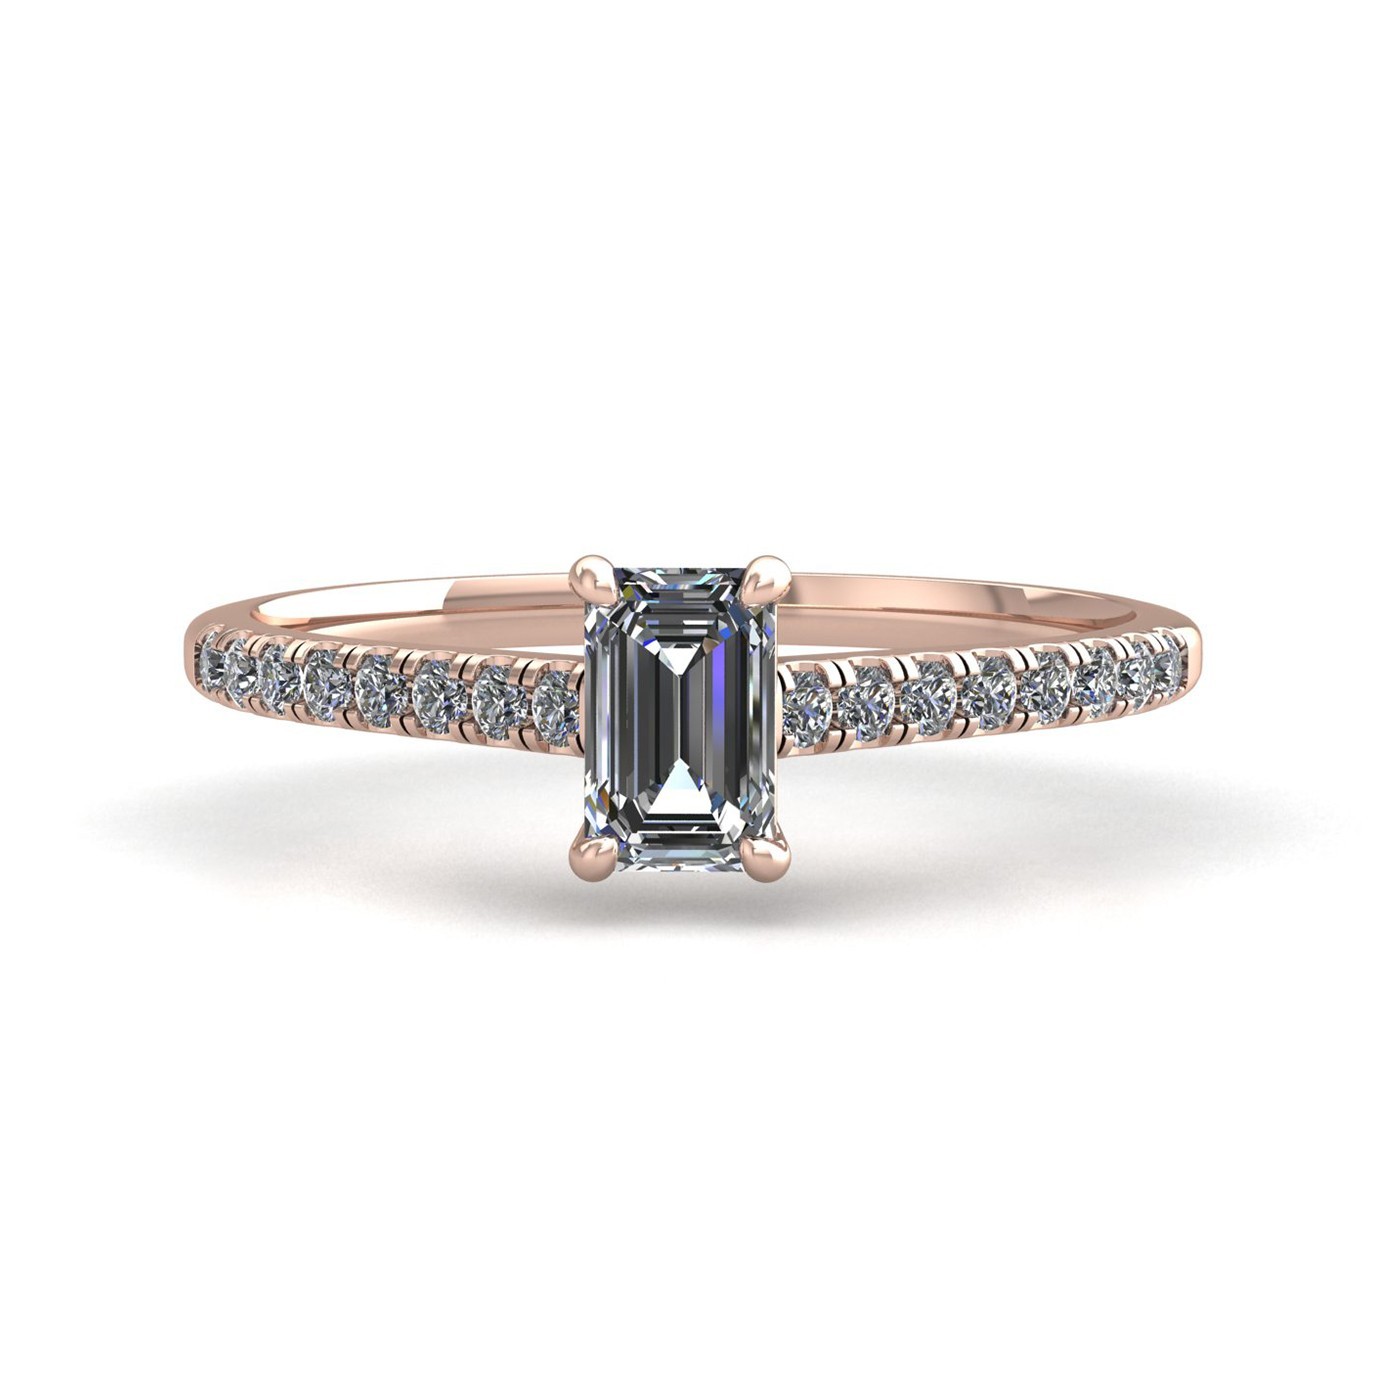 18k rose gold  0,30 ct 4 prongs emerald cut diamond engagement ring with whisper thin pavÉ set band Photos & images